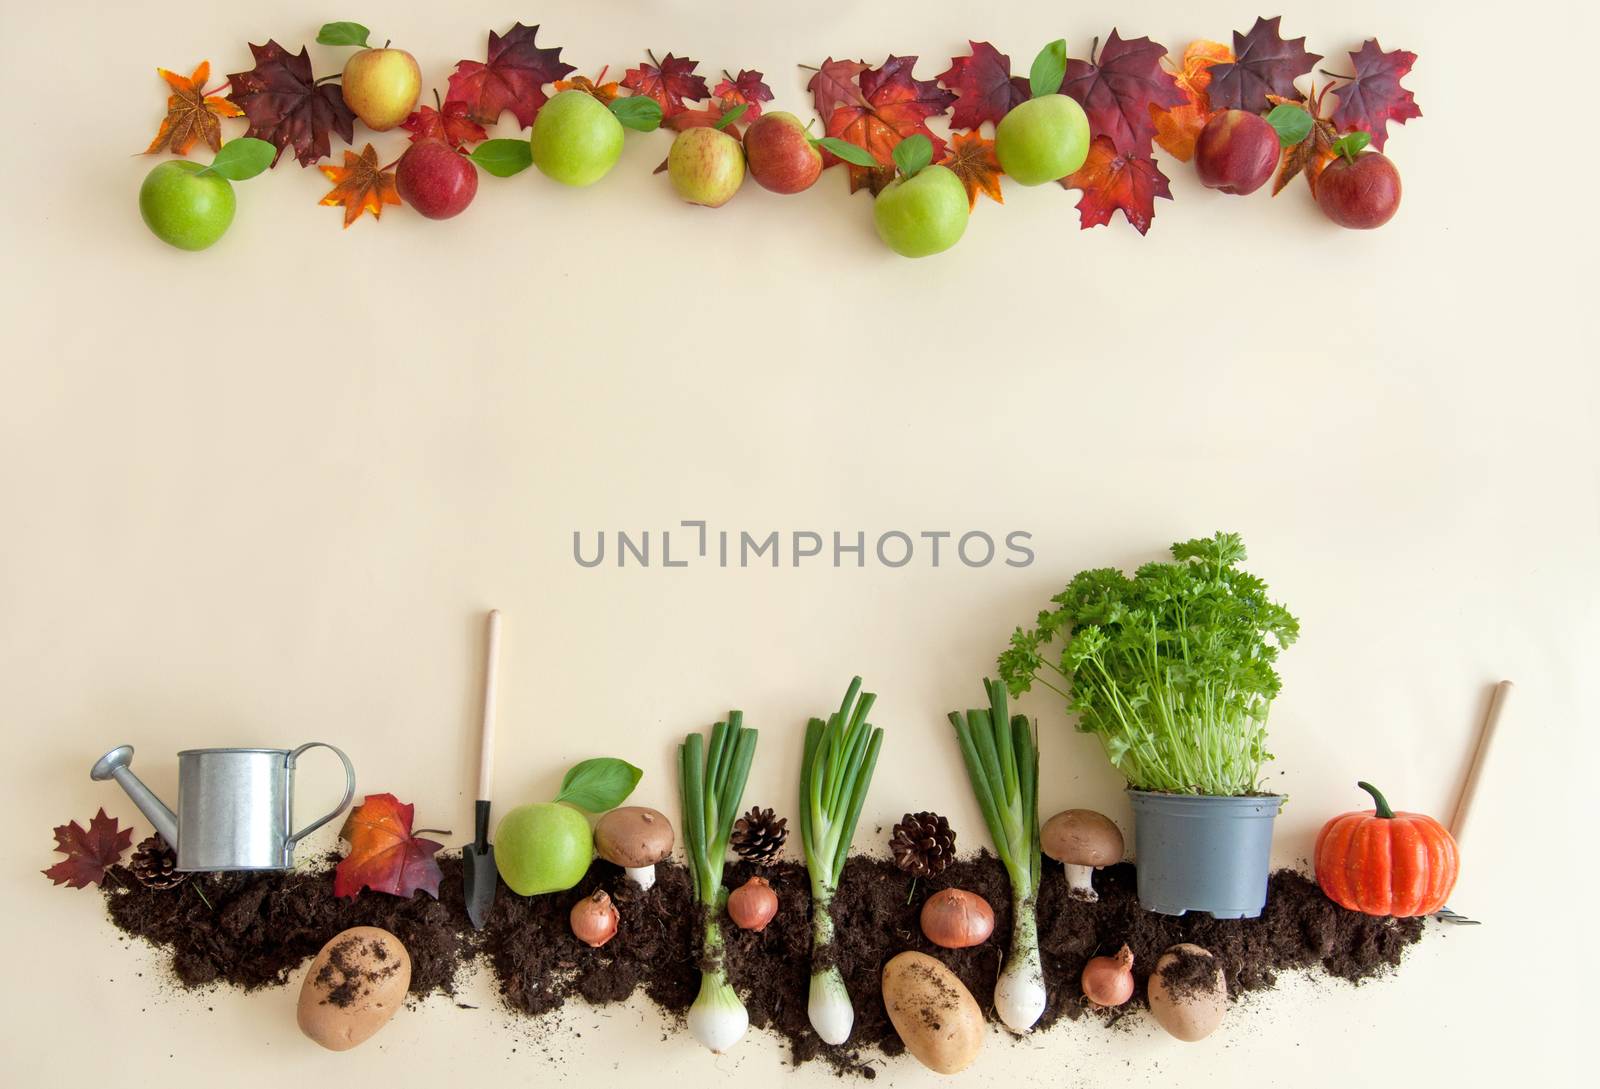 Autumn fruits growing in soil patch with apple orchard frame 